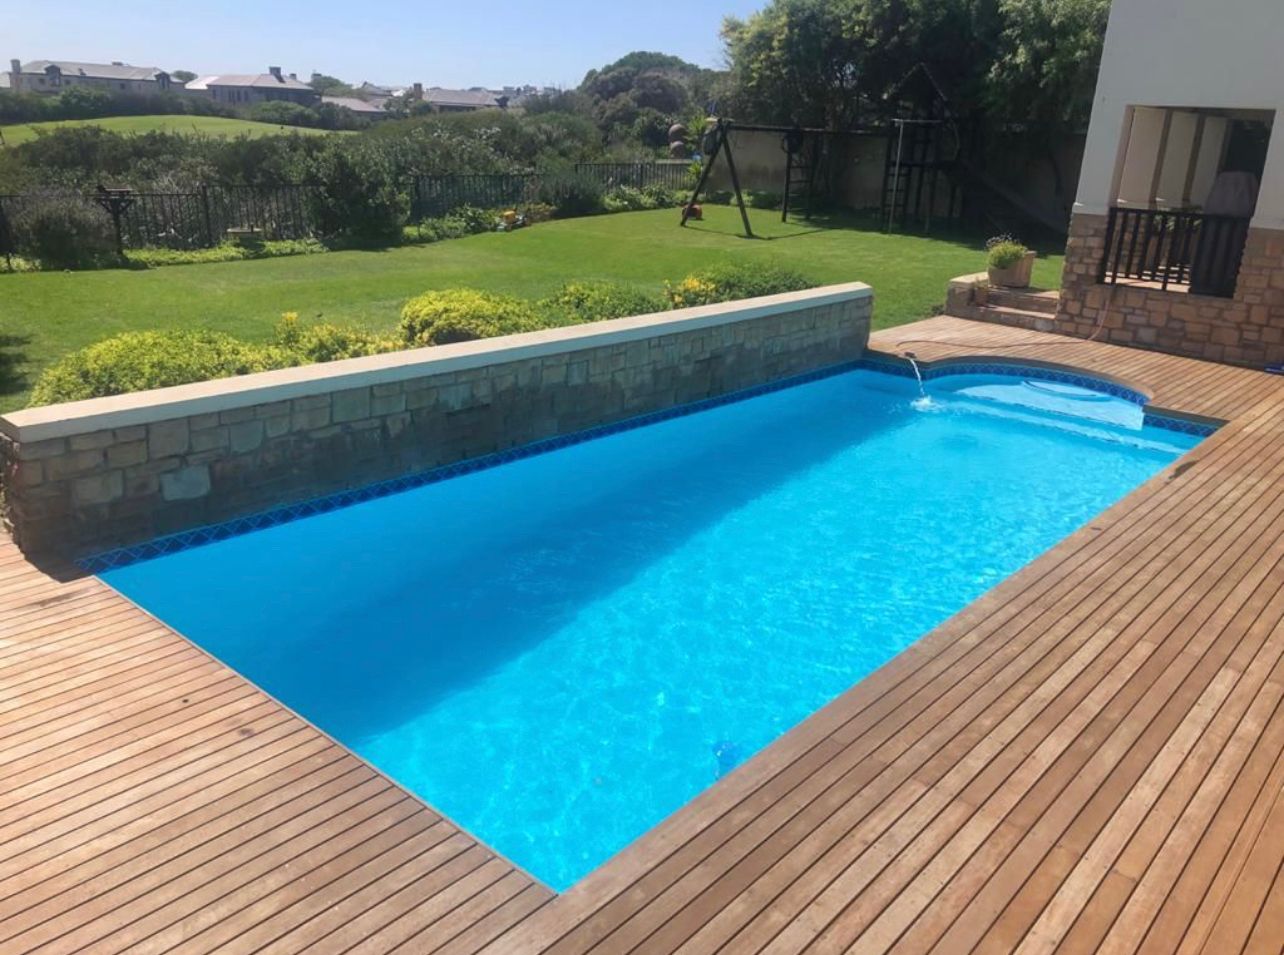 Pool Prices Cape town